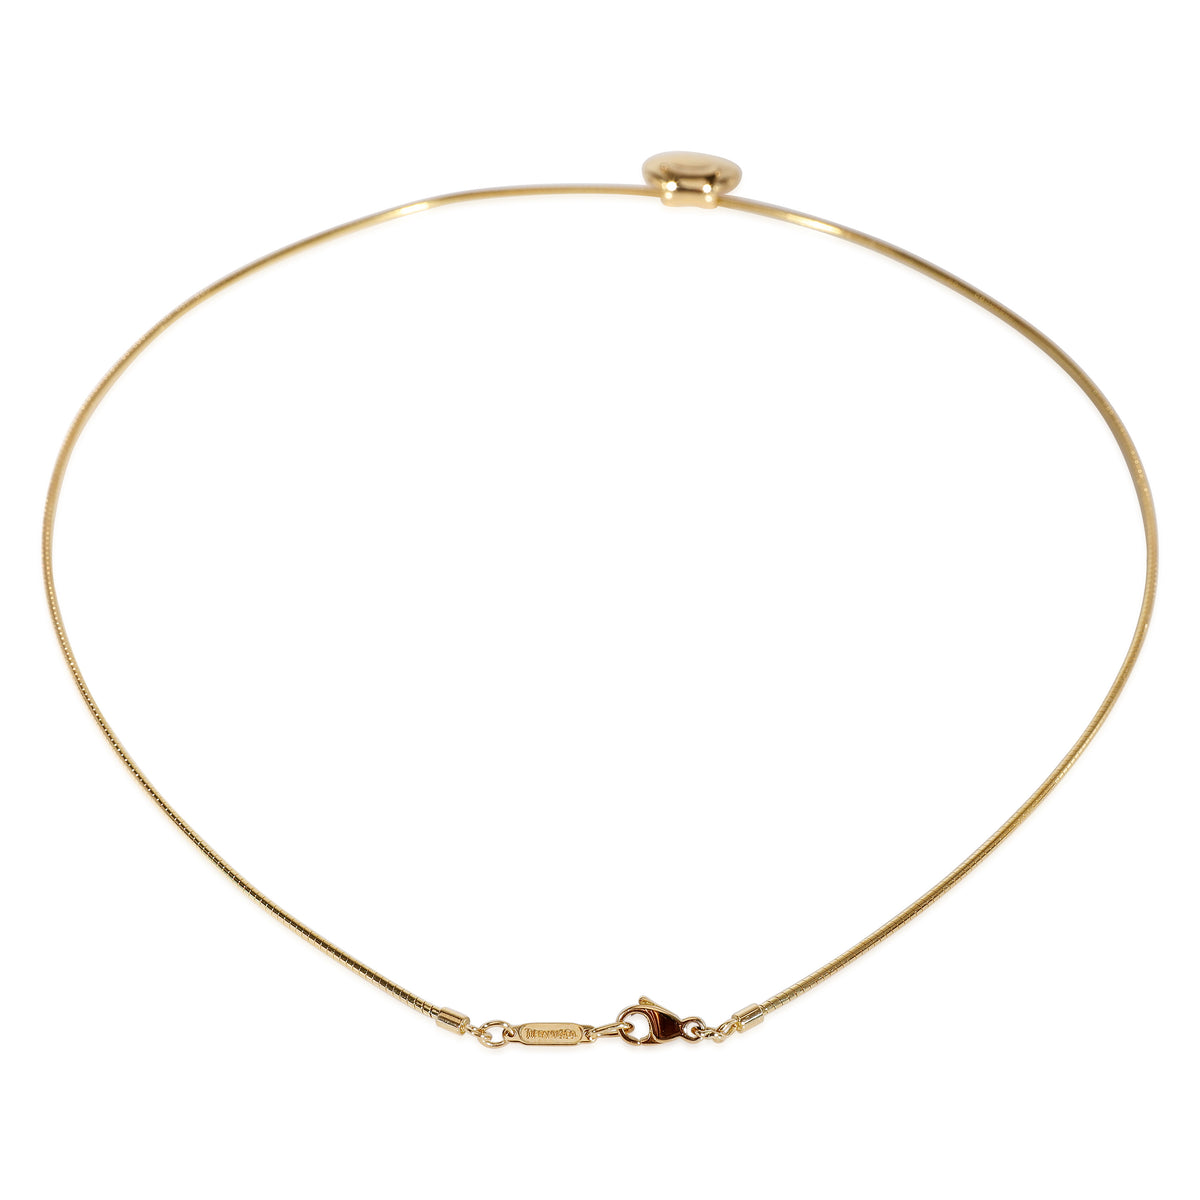 Tiffany & Co. Concave Disc Pendant in 18k Yellow Gold